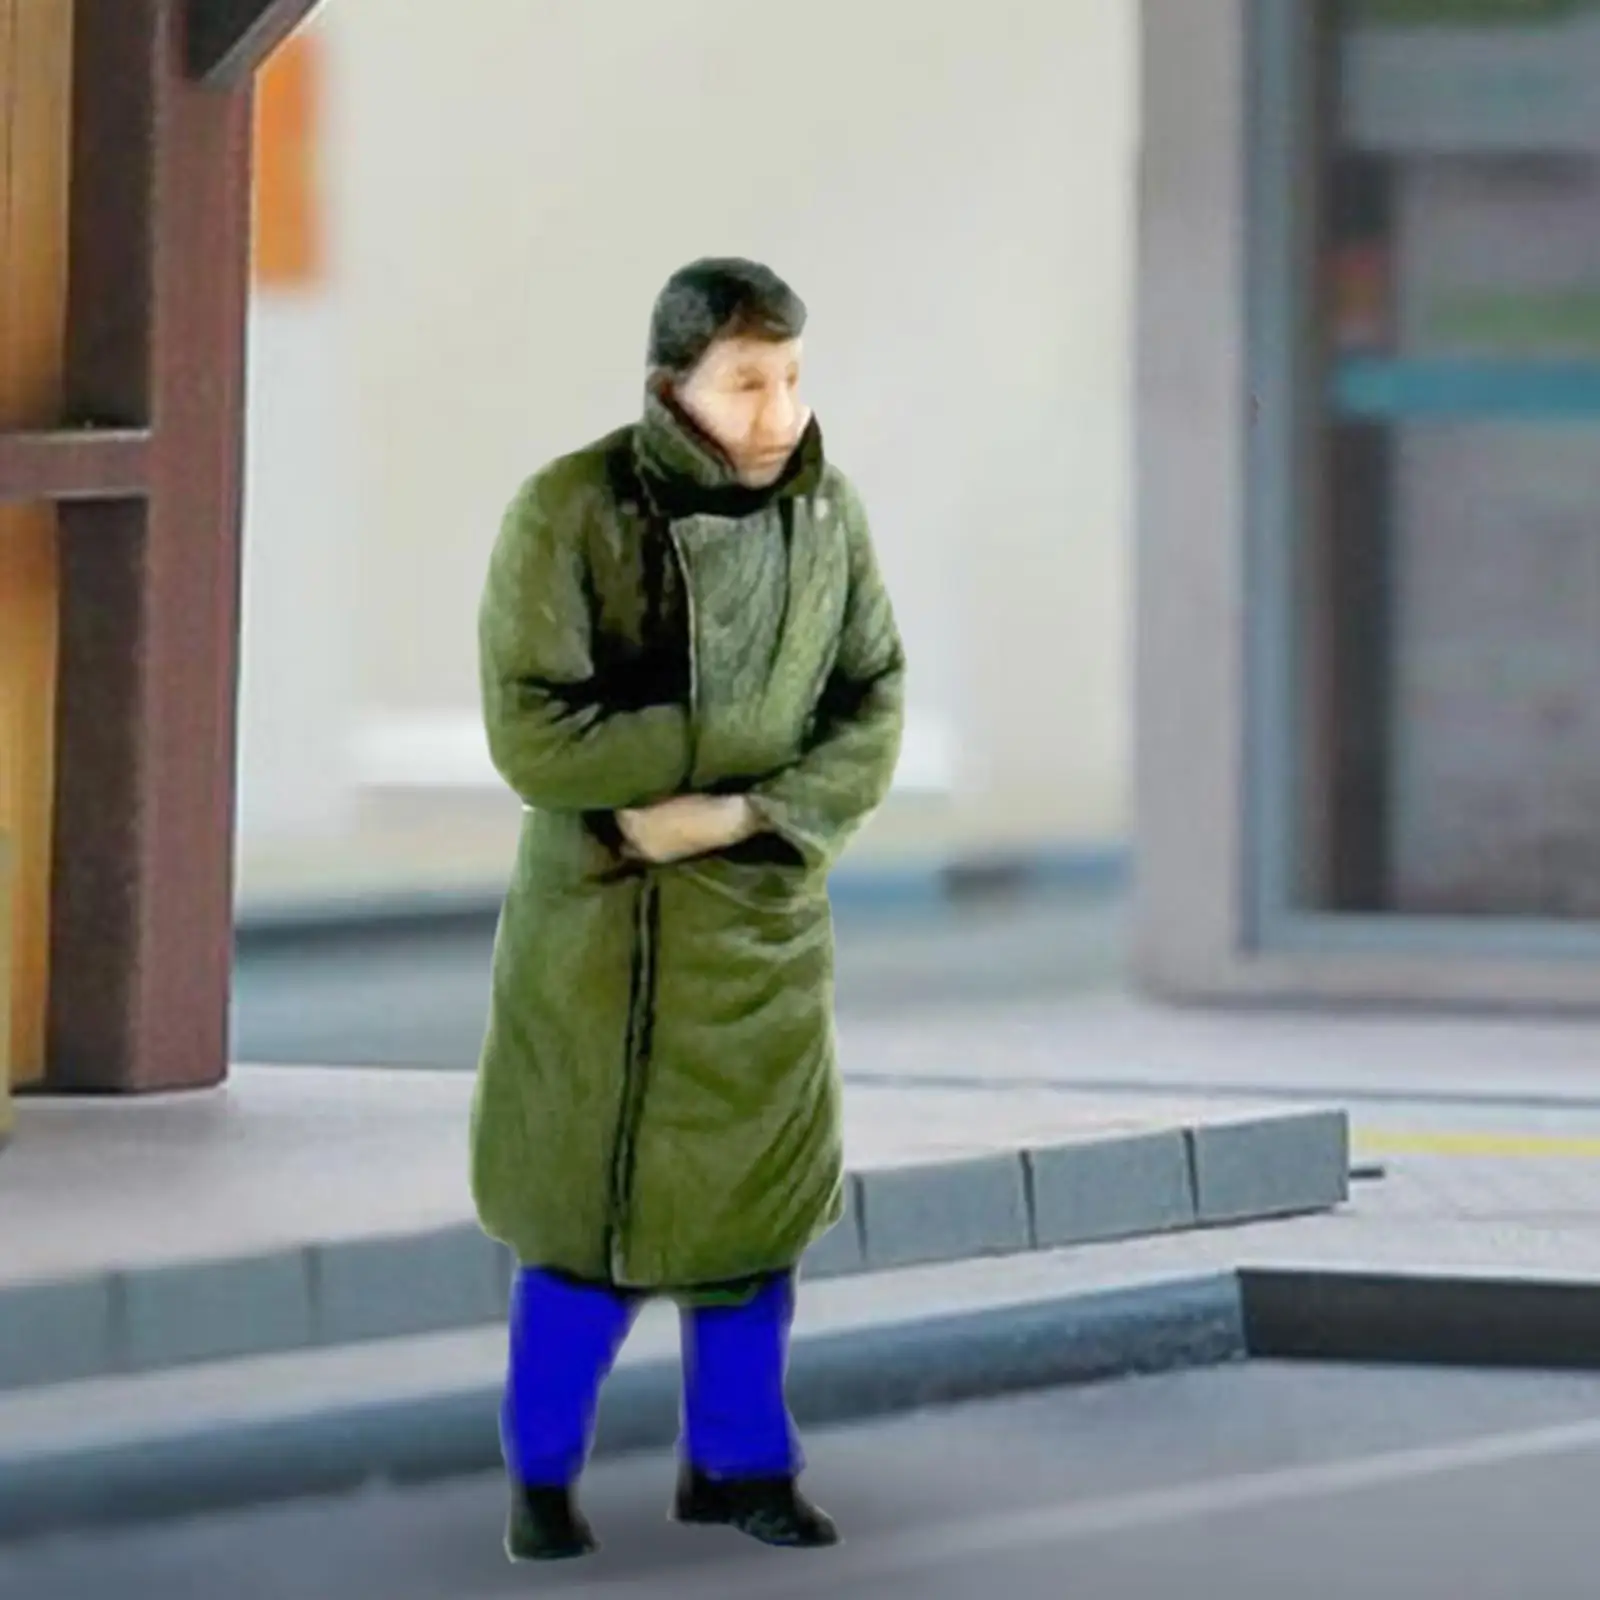 Simulation 1/87 Model Figure Collection Handmade People Figurines for Dollhouse Scenery Landscape Photography Props Layout Decor